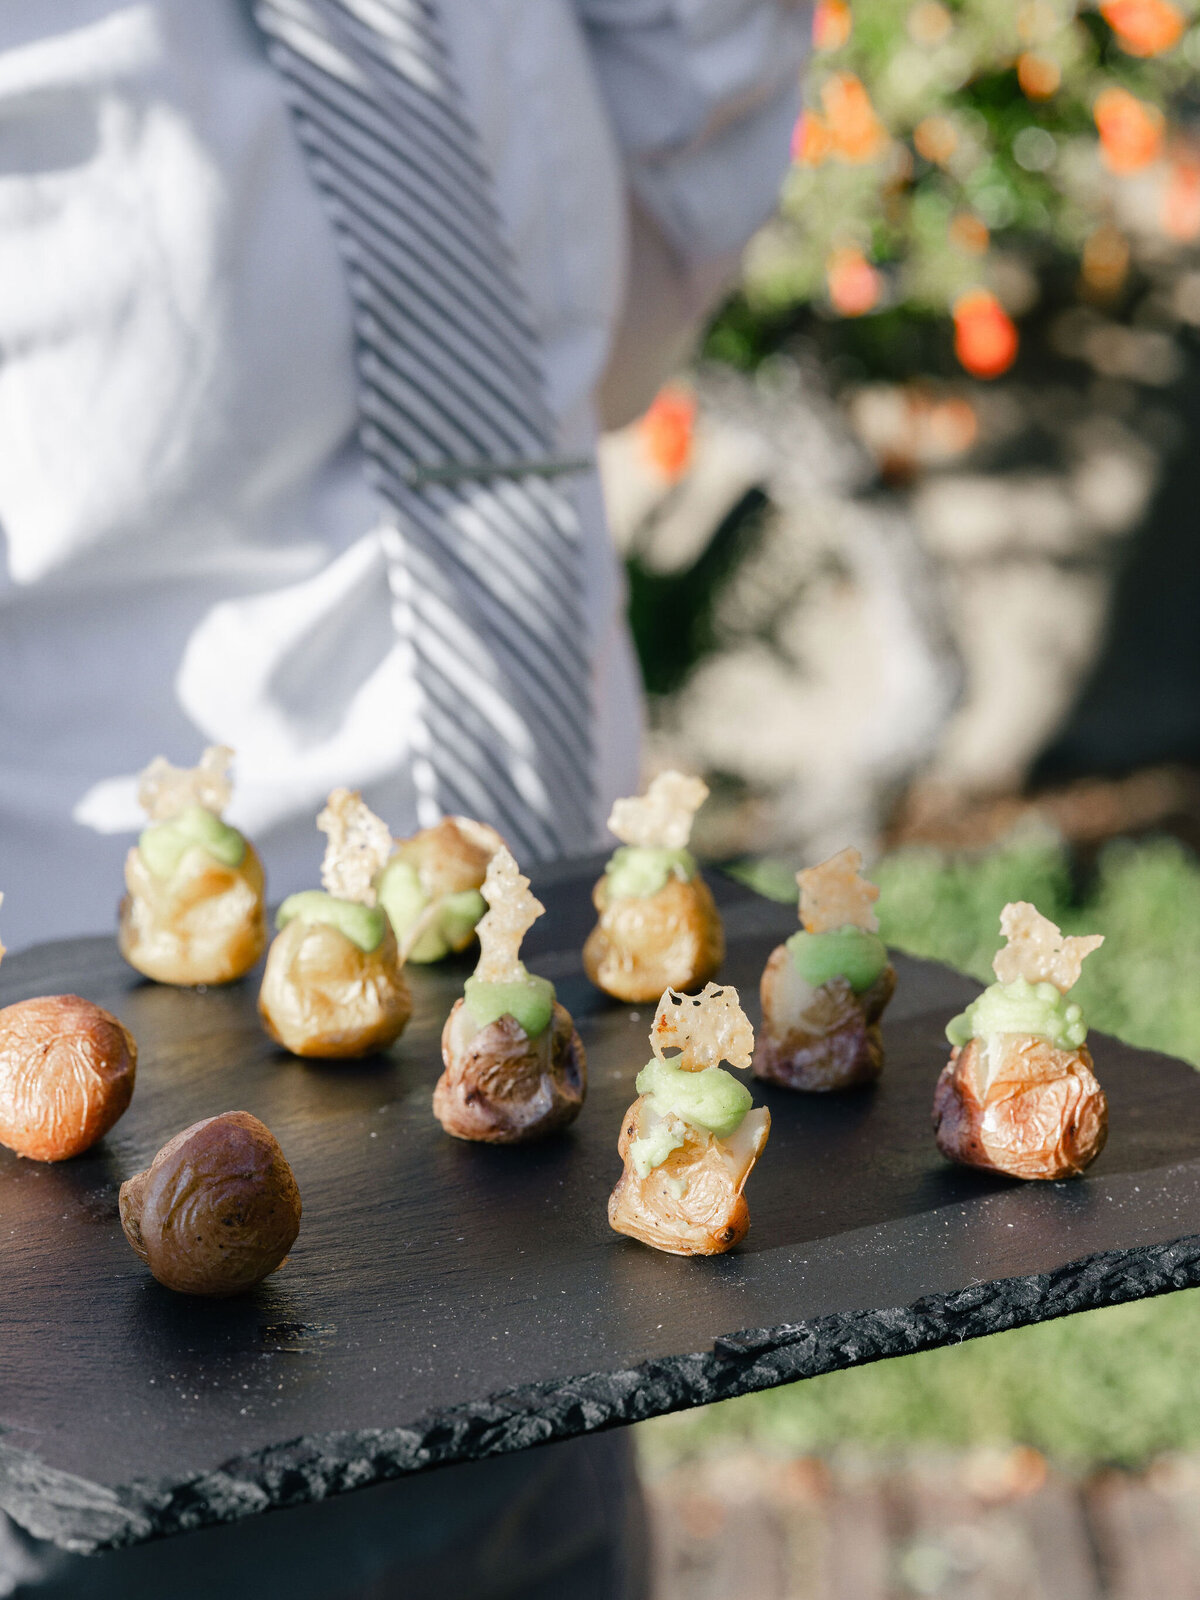 paula le duc (PLD) catering serving wedding hors d'oeuvres and appetizers to northern california wedding guests using custom and unique food presentation